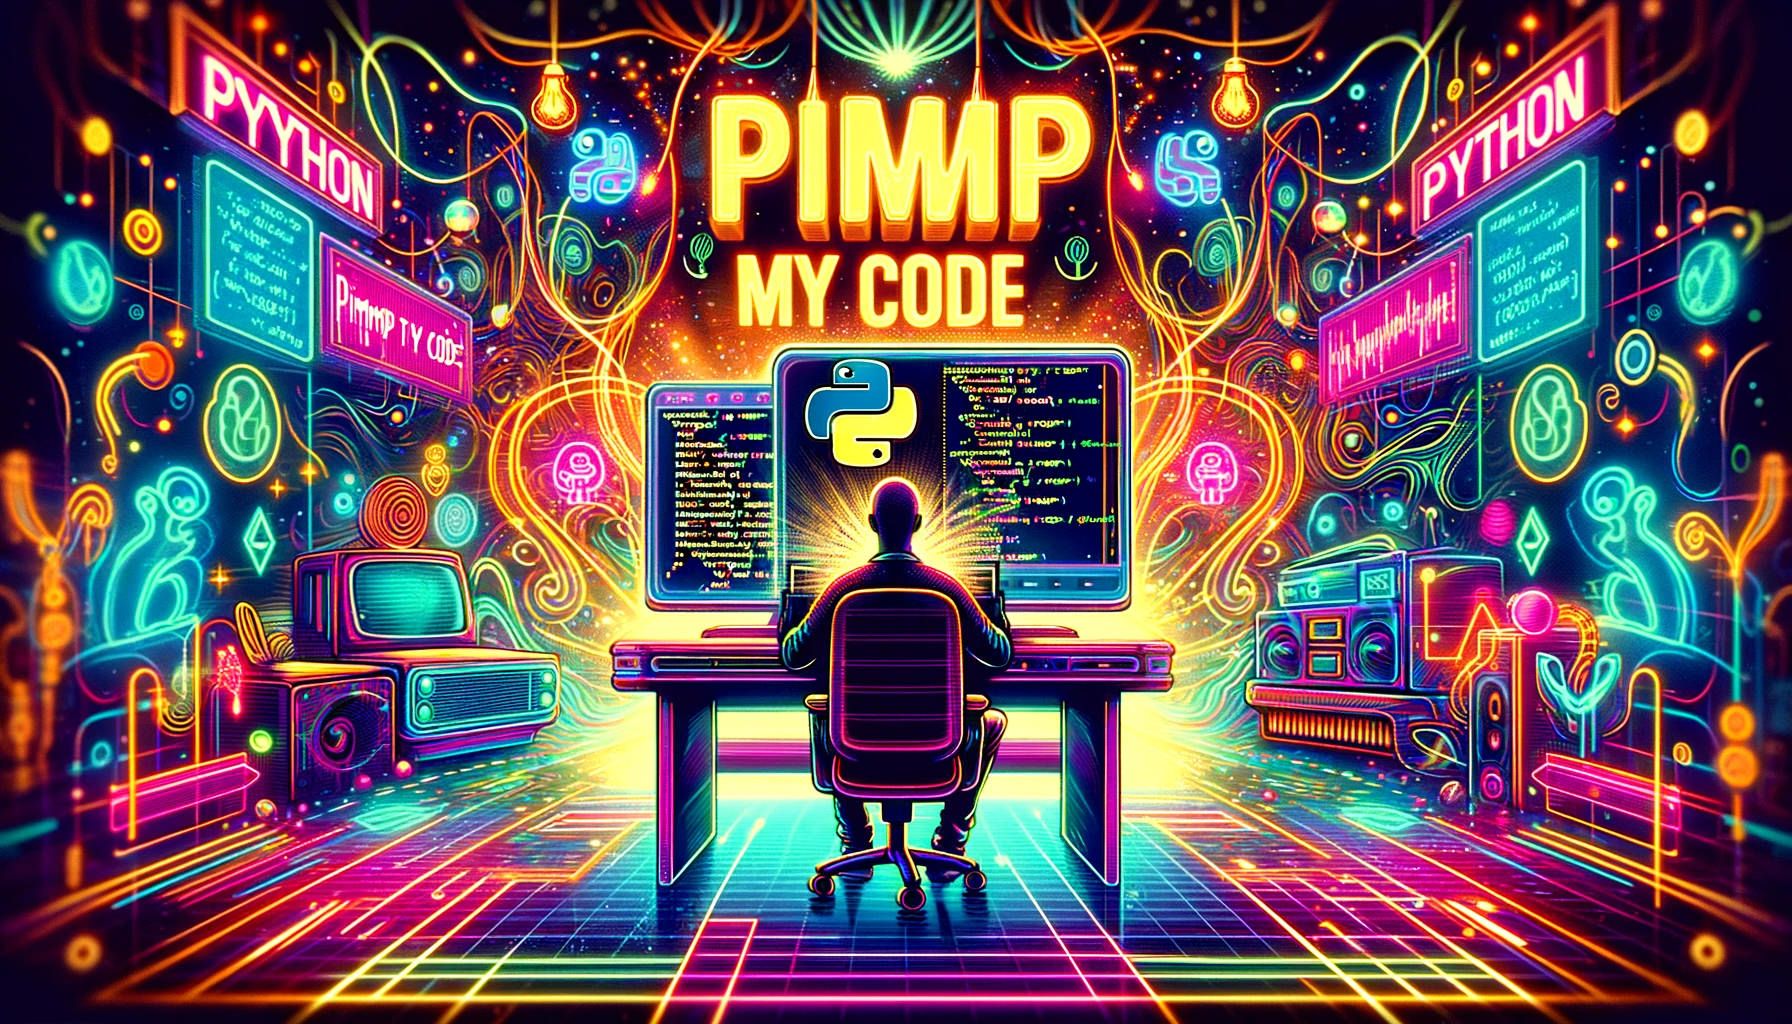 Programmer at a vibrant neon-lit desk with Python code on screens, 'Pimp My Code' overhead